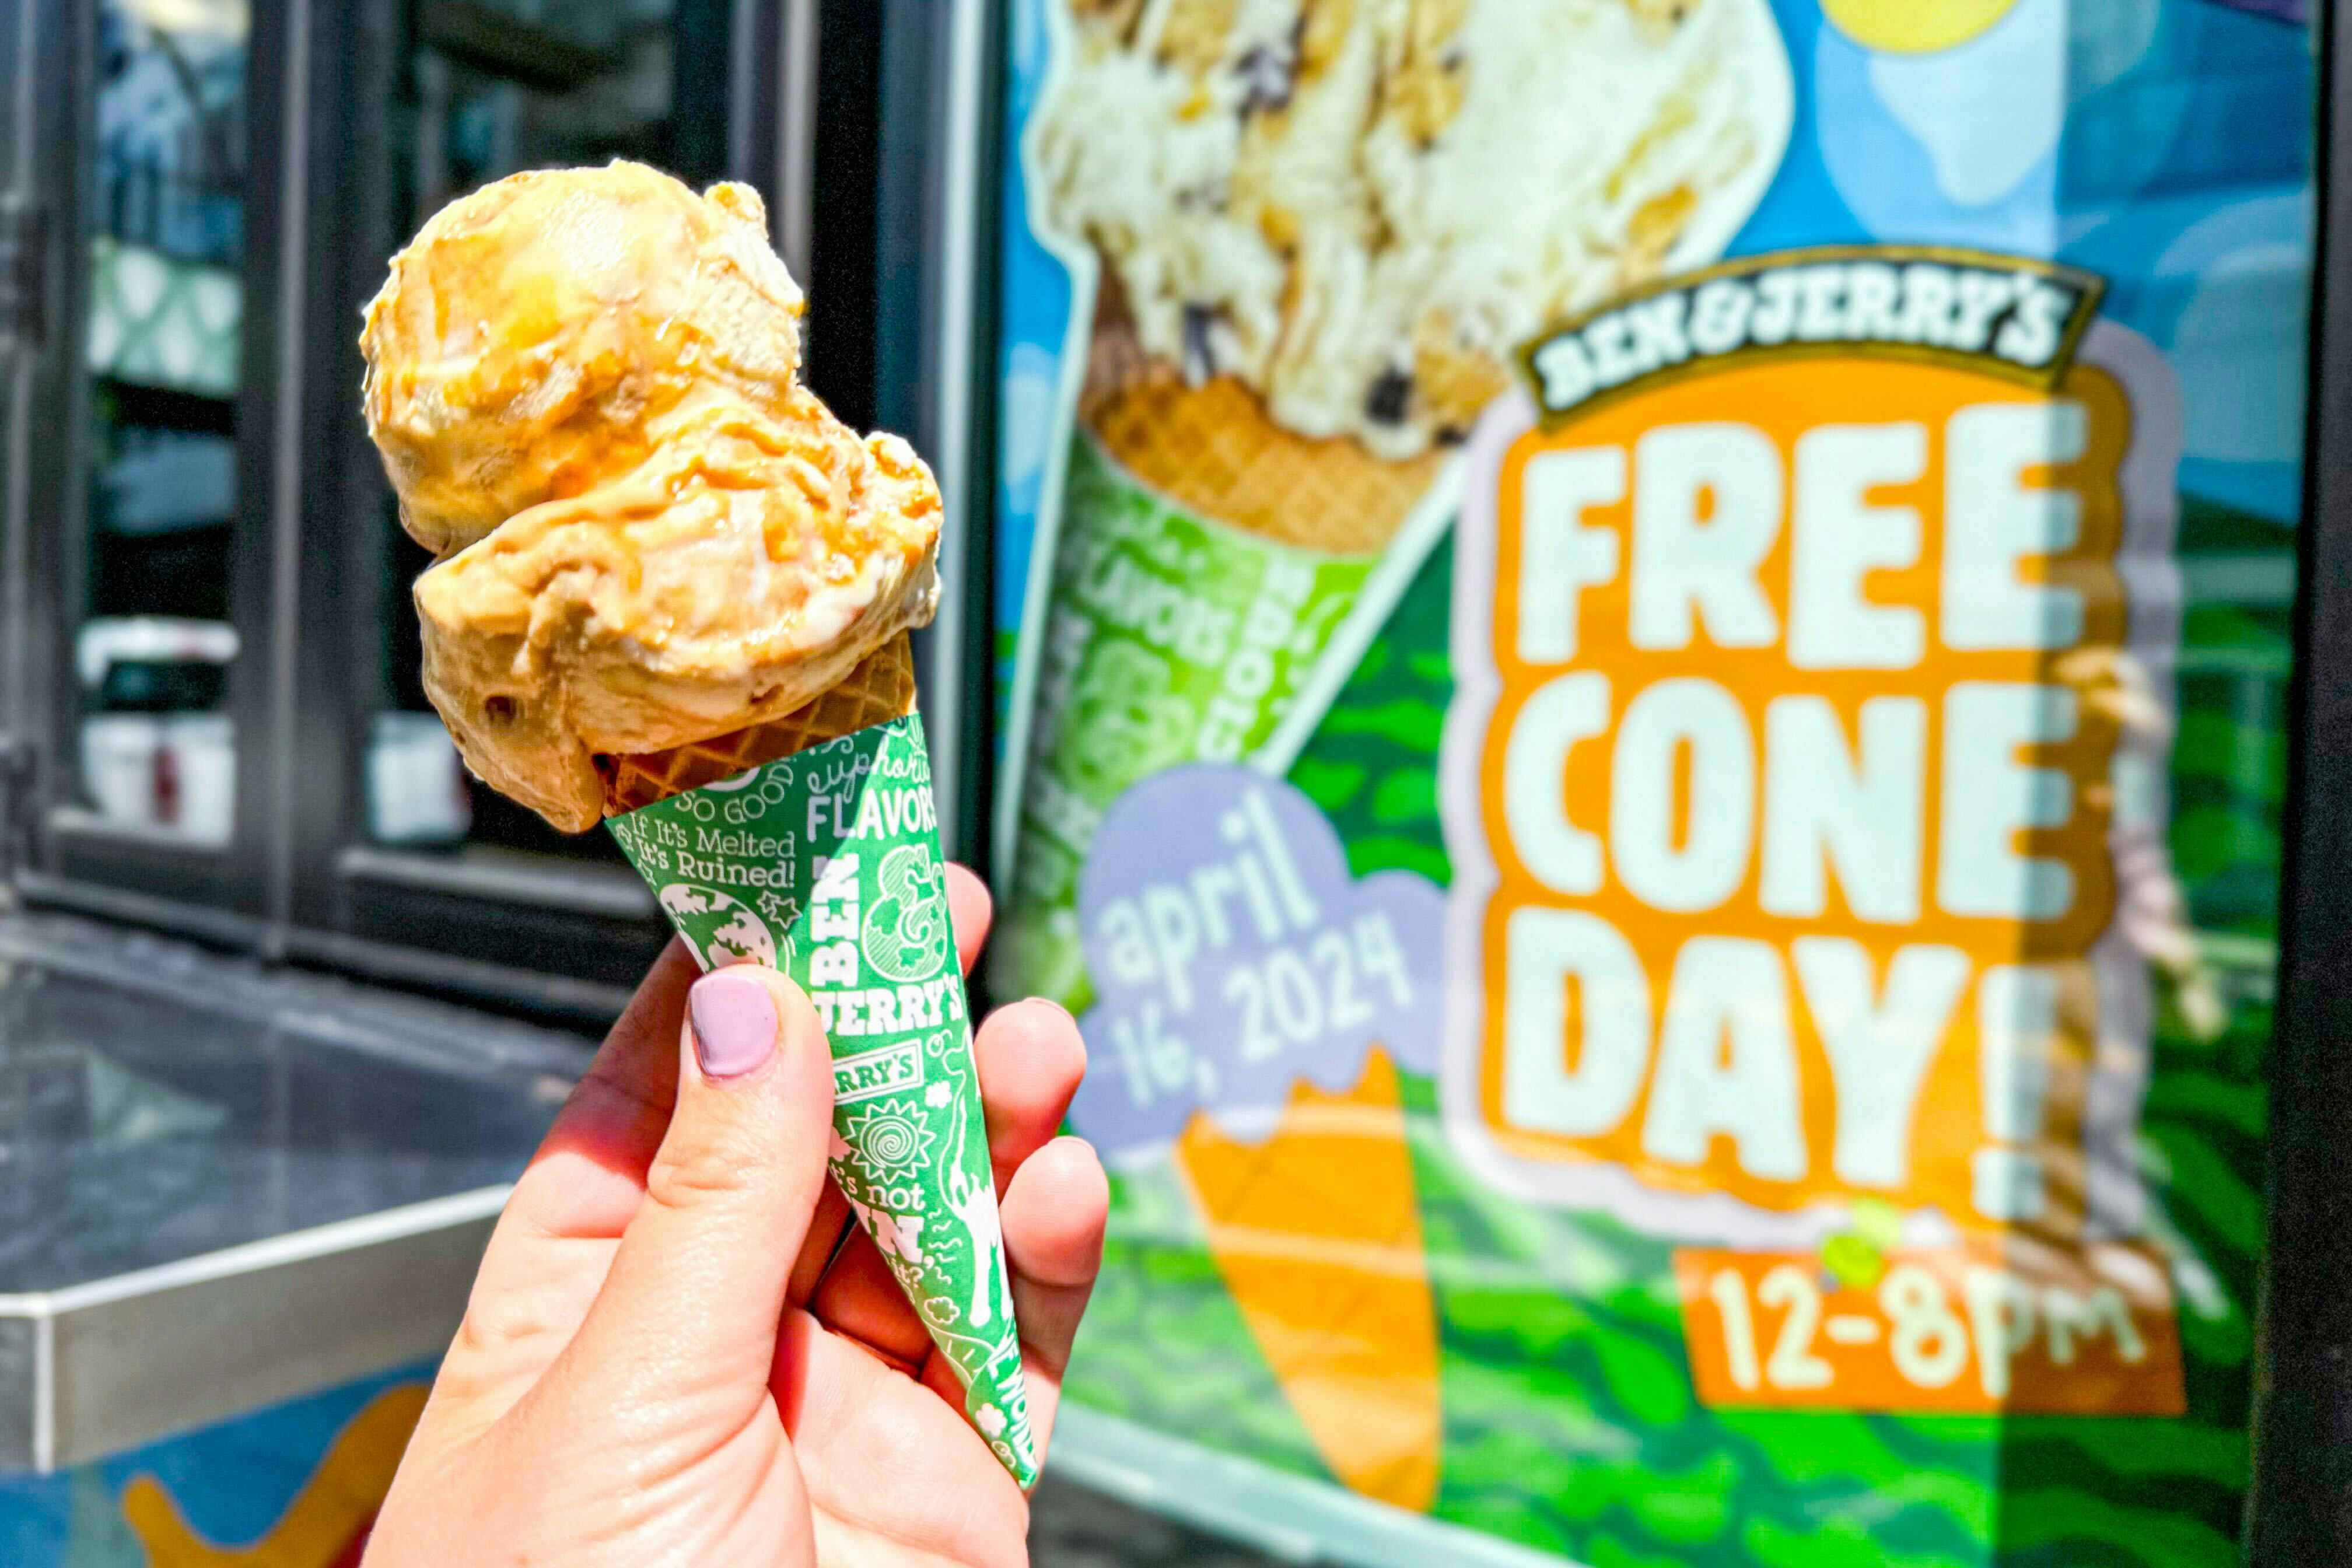 Ben & Jerry's Free Cone Day Is TODAY, April 16 (Noon - 8 p.m.)